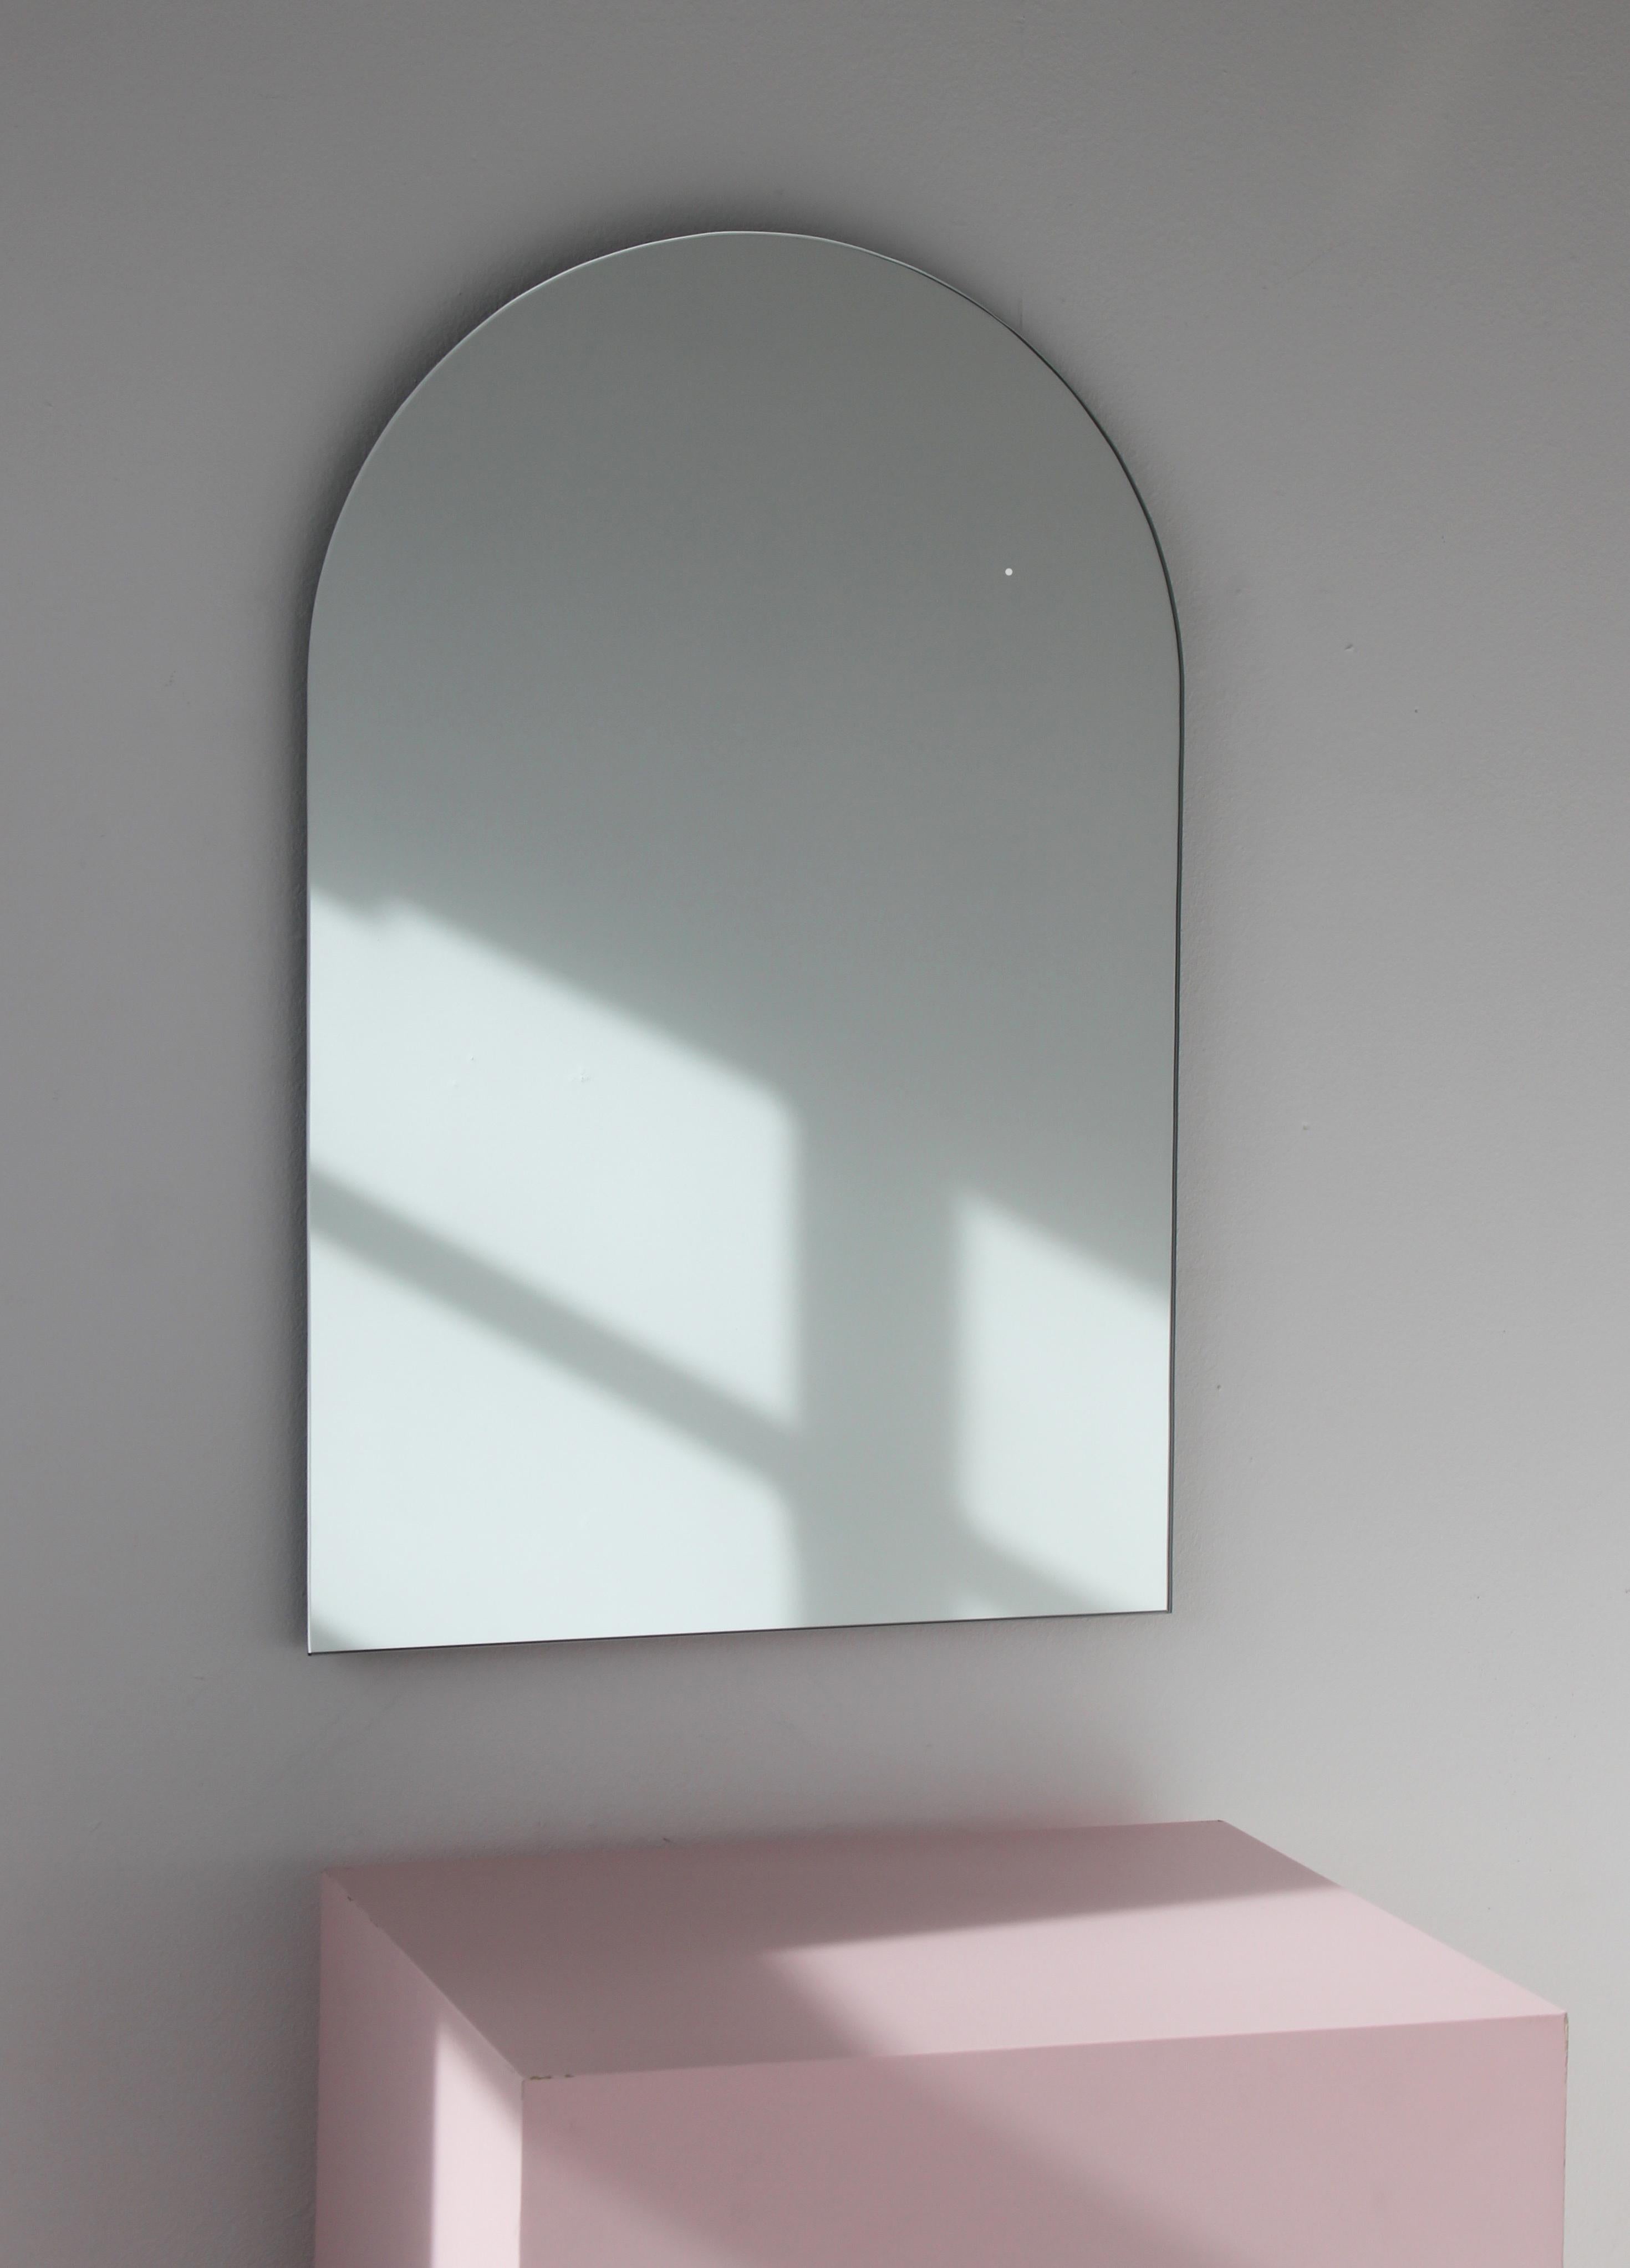 Minimalist Arcus™ arched frameless mirror with a floating effect. Quality design that ensures the mirror sits perfectly parallel to the wall. Designed and made in London, UK.

Fitted with professional plates not visible once installed for an easy